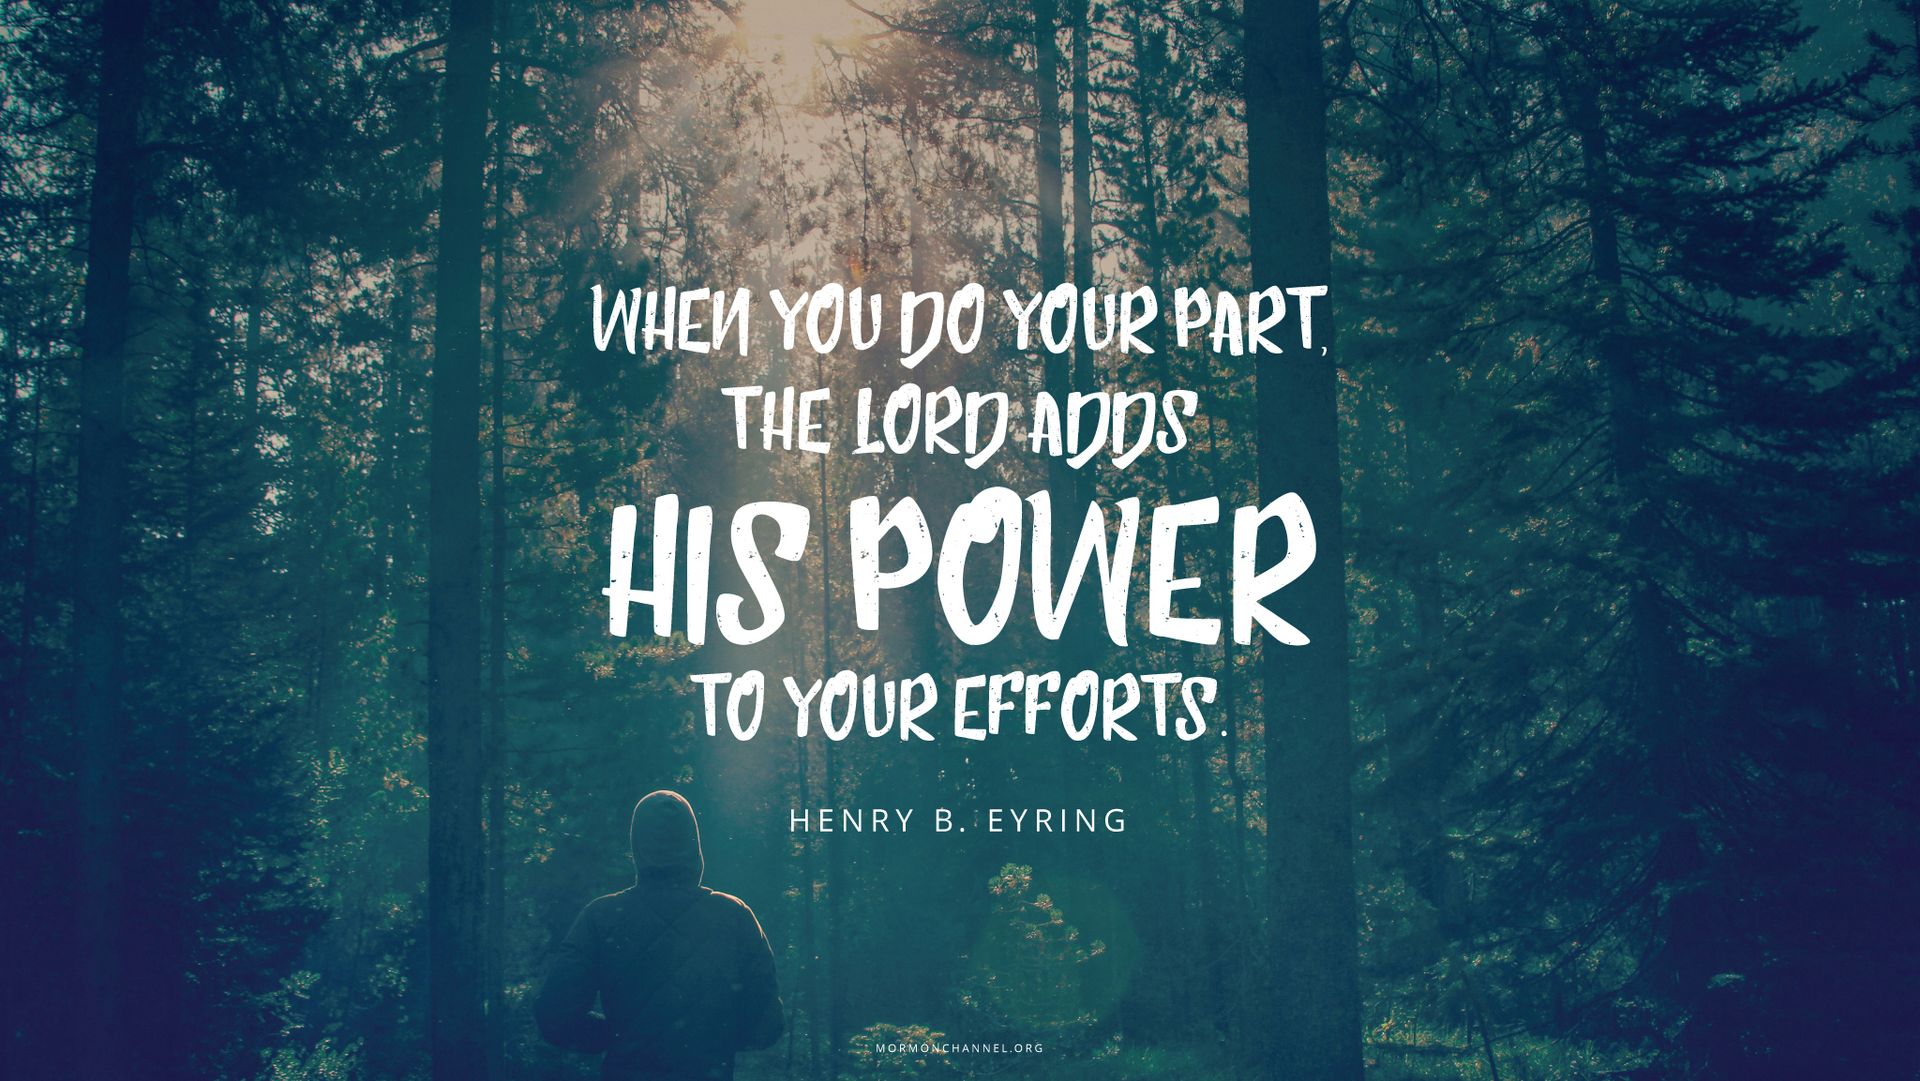 “When you do your part, the Lord adds His power to your efforts.”—President Henry B. Eyring, “You Are Not Alone in the Work”